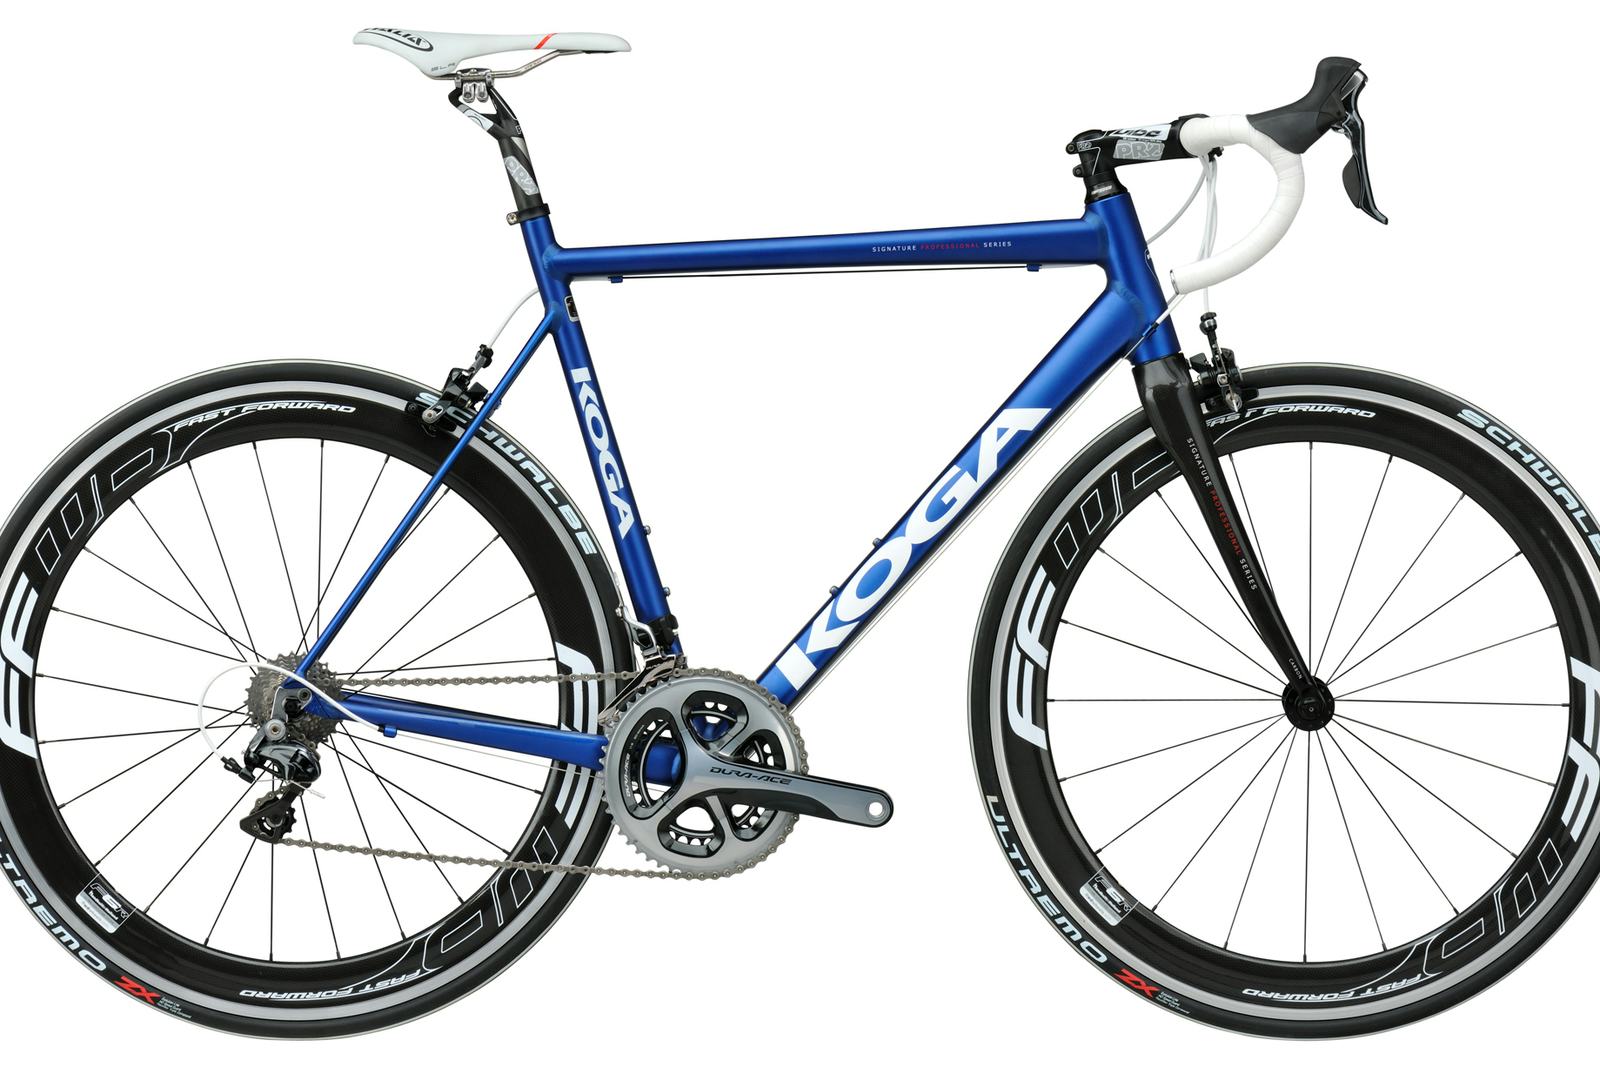 The A-Limited comes with a blue anodized frame, offering durability and a weight reduction compared with painted frames.